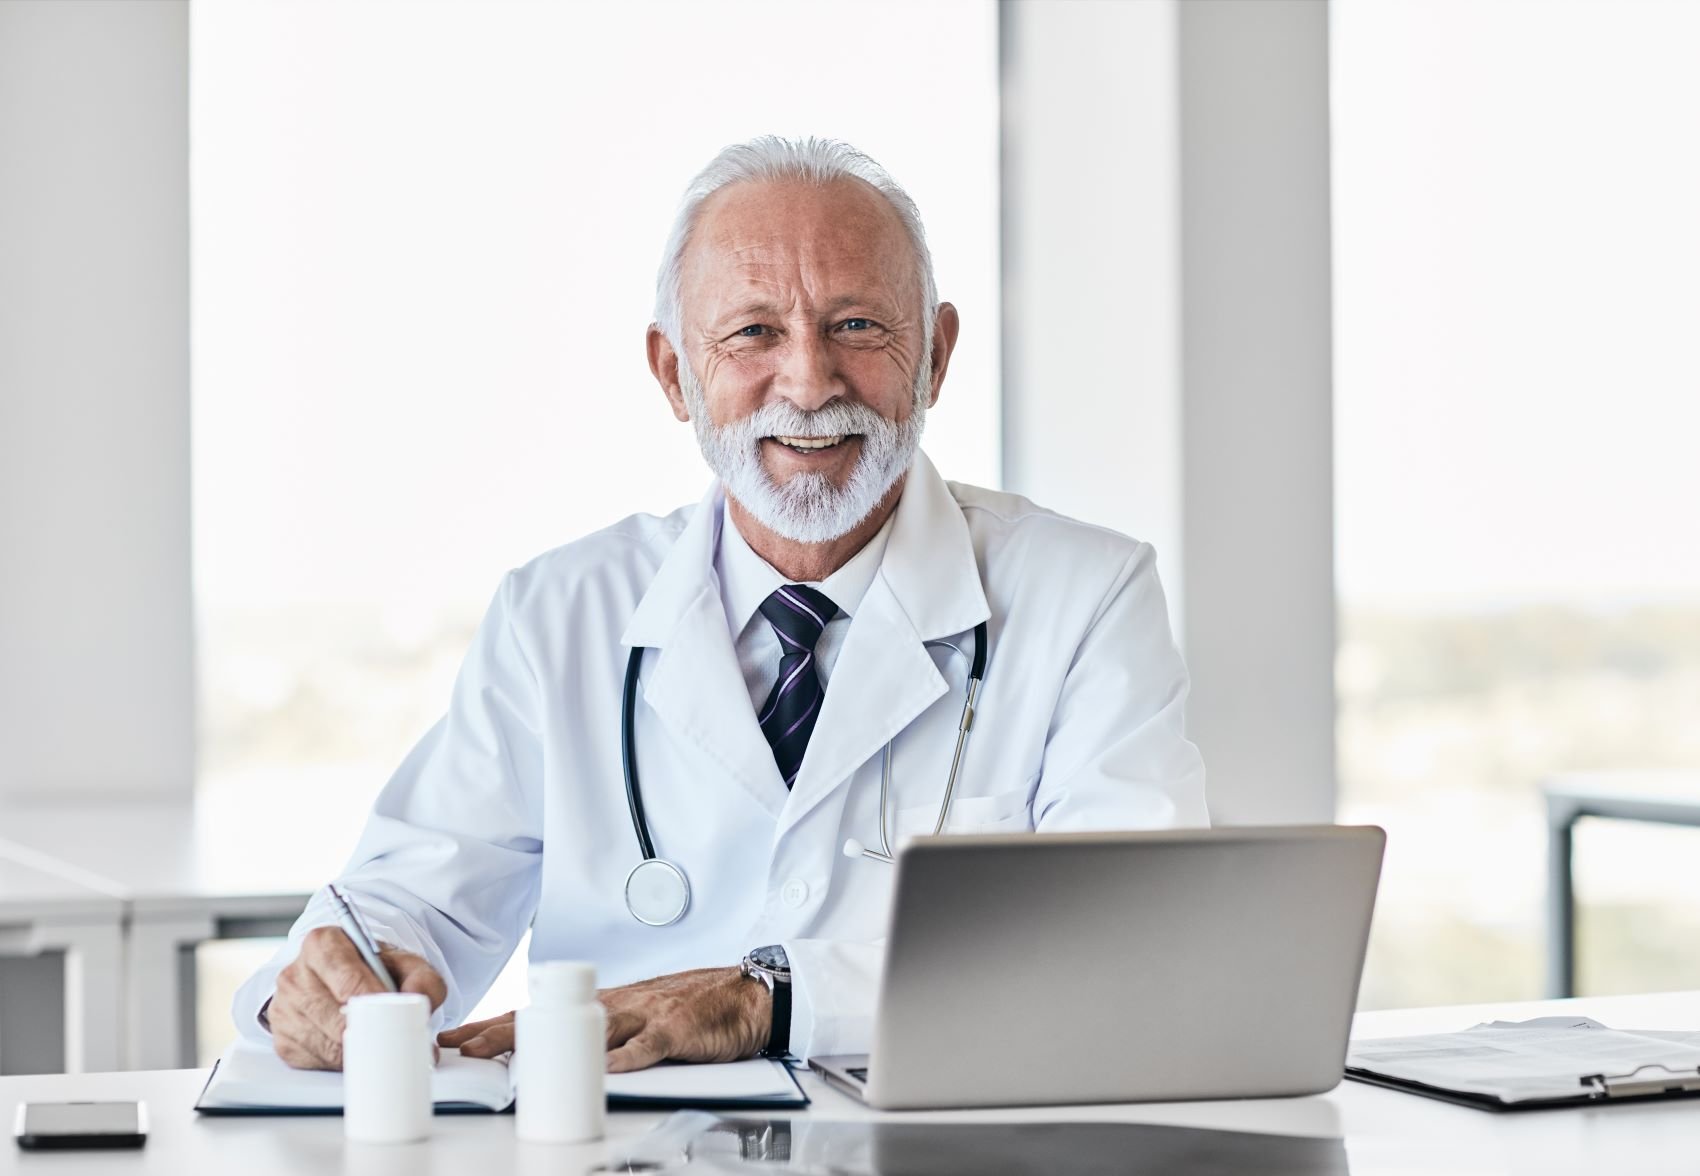 Older doctor is satisfied to the care coordination platform and reports